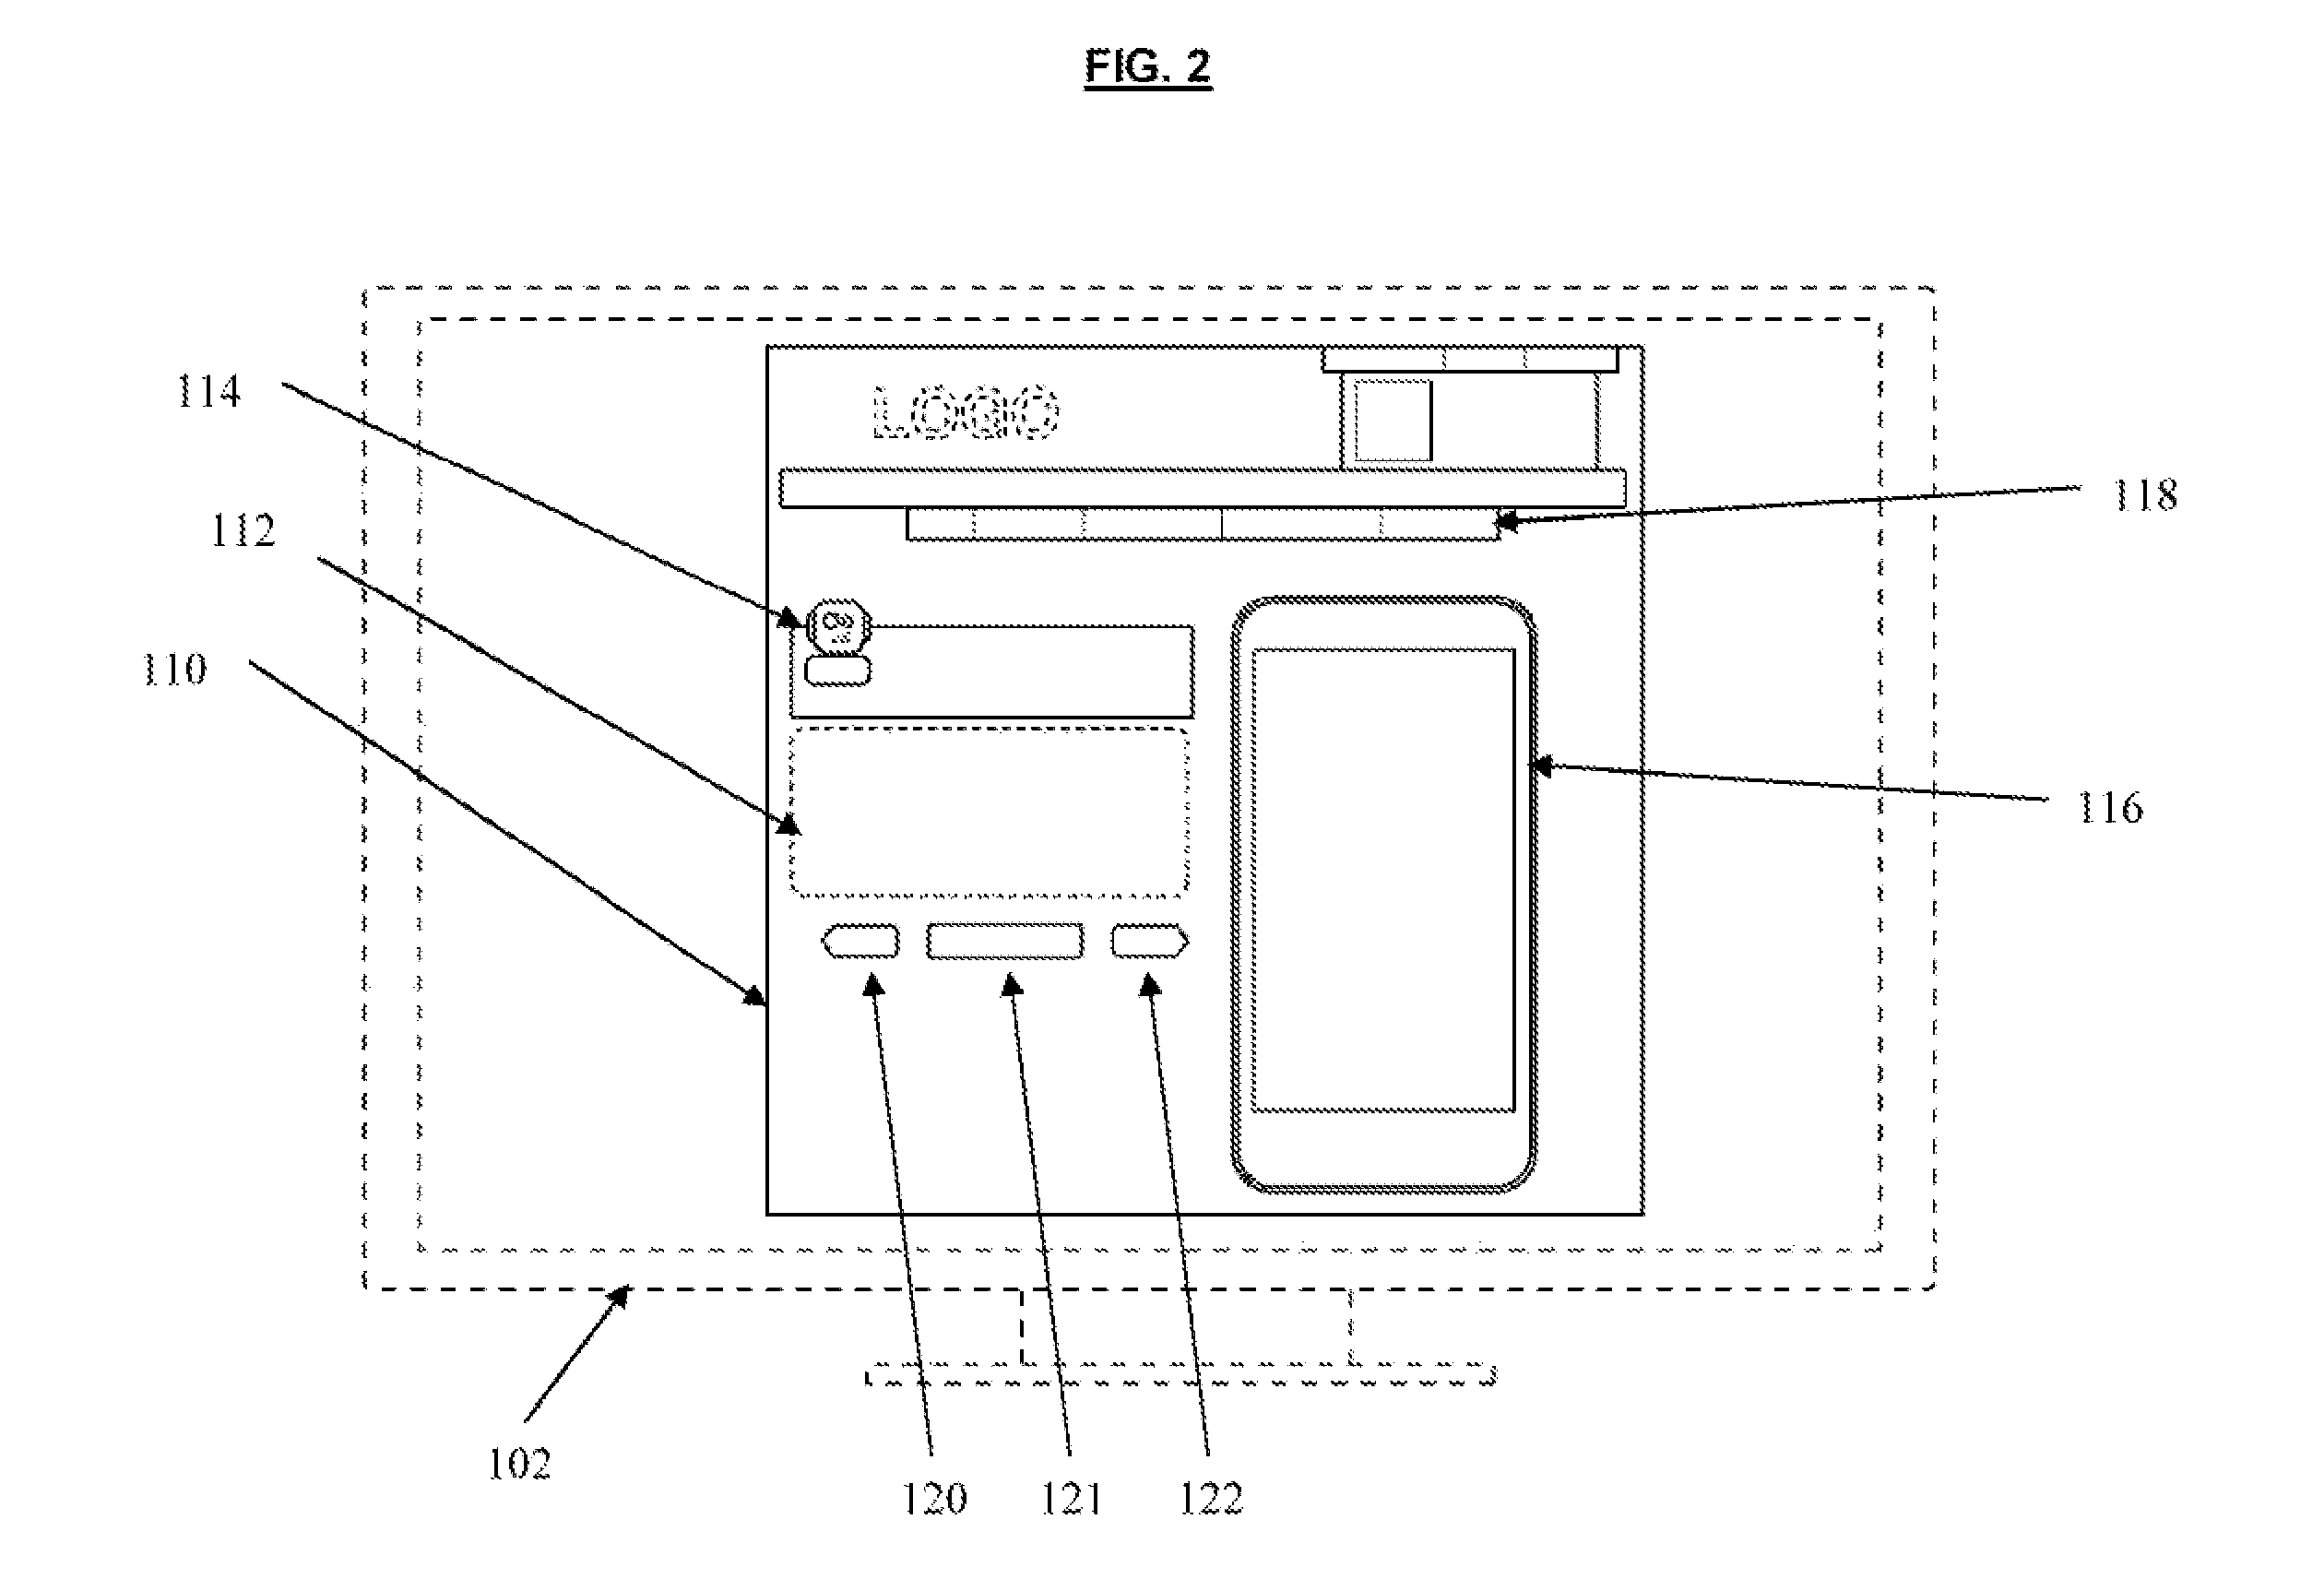 Systems and methods for a mobile business application development and deployment platform